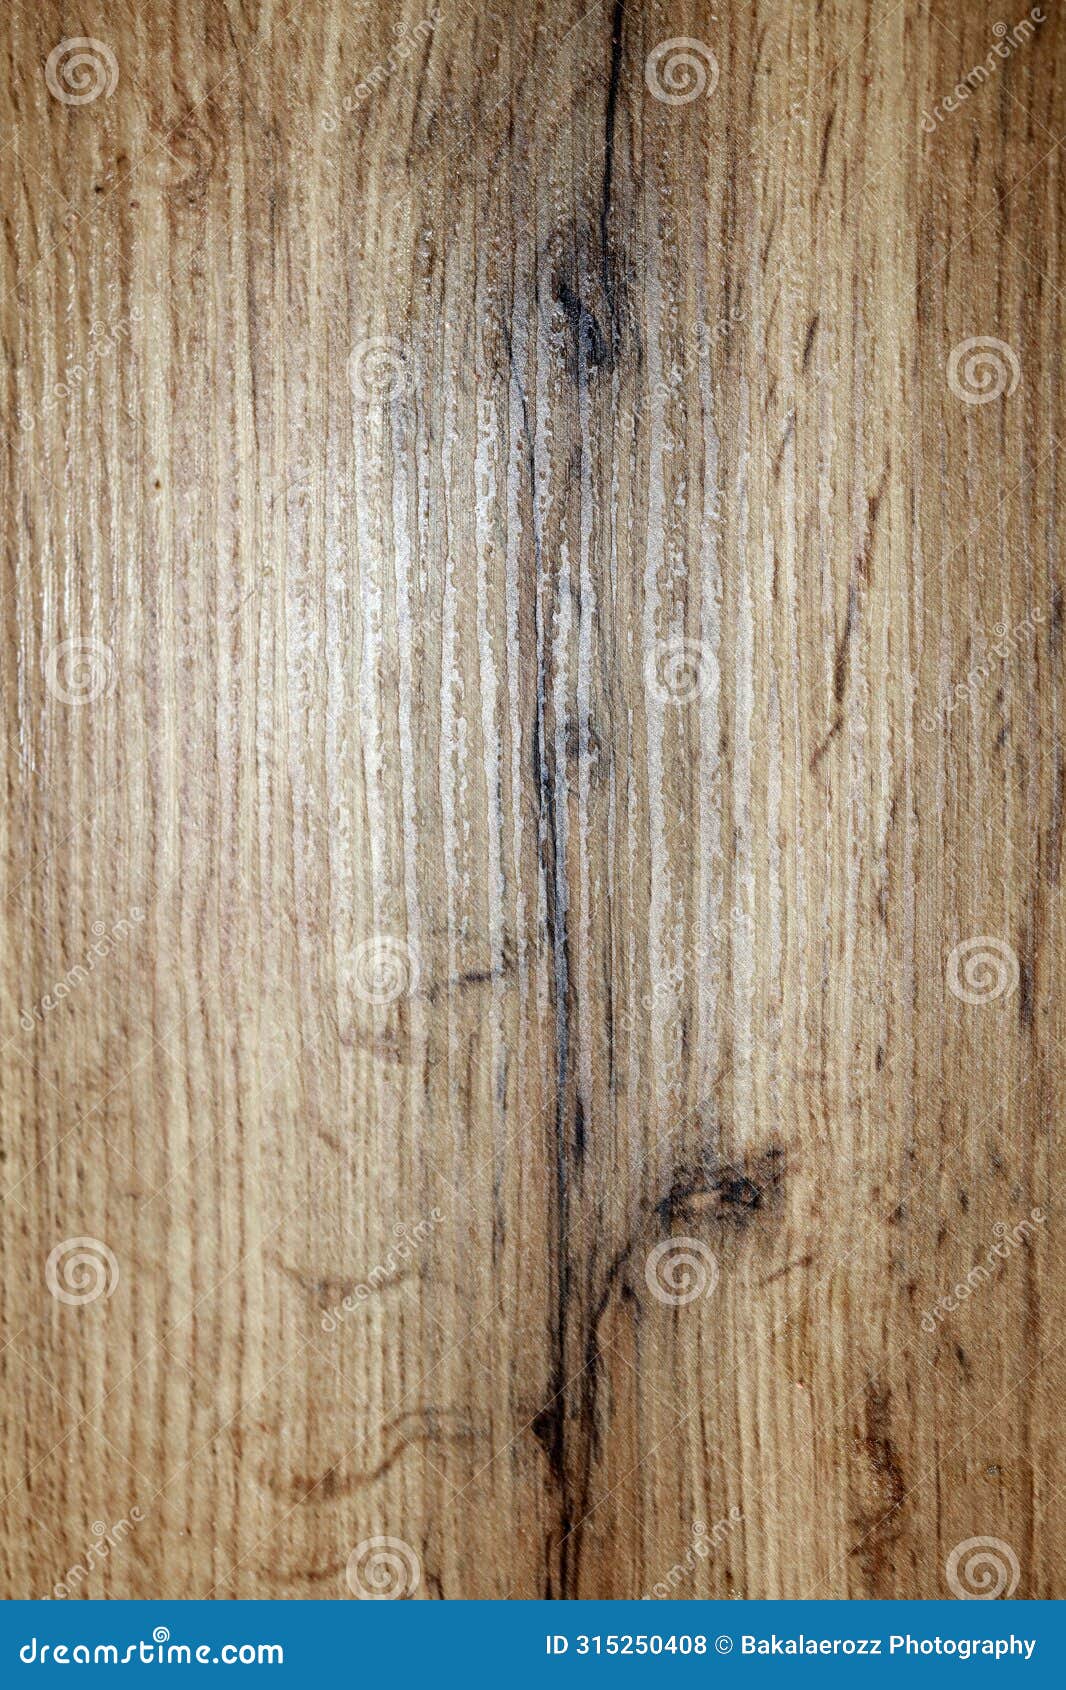 retro brown old wooden table surface macro background big size instant downloads fine modern art high quality prints products